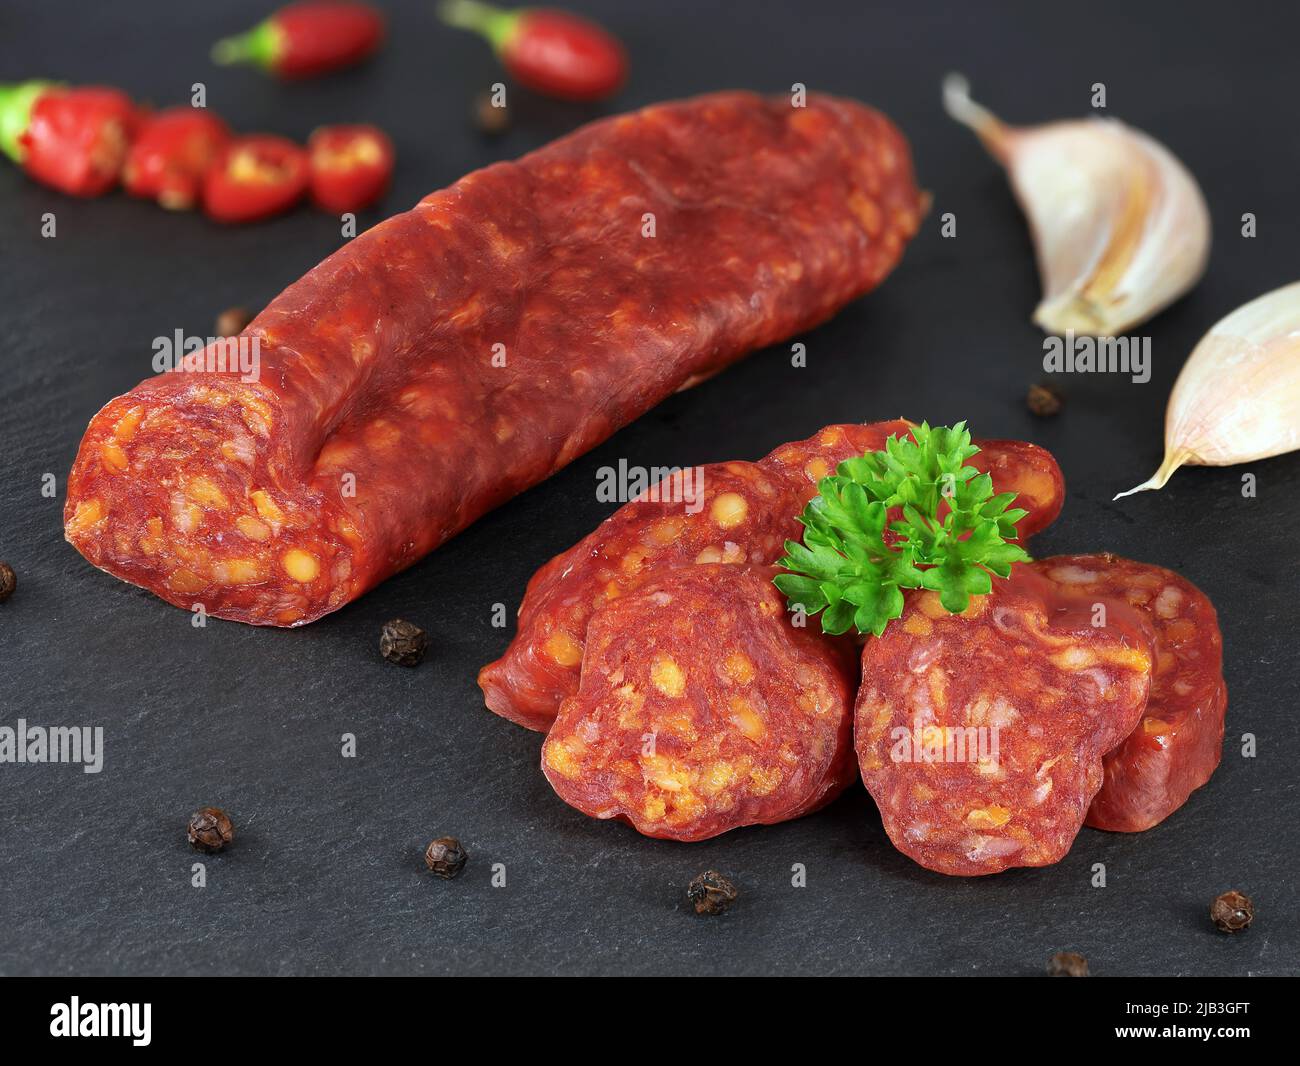 Spanish traditional chorizo sausage with fresh herbs, garlic, pepper and chili peppers served on black slate board, close up. Stock Photo